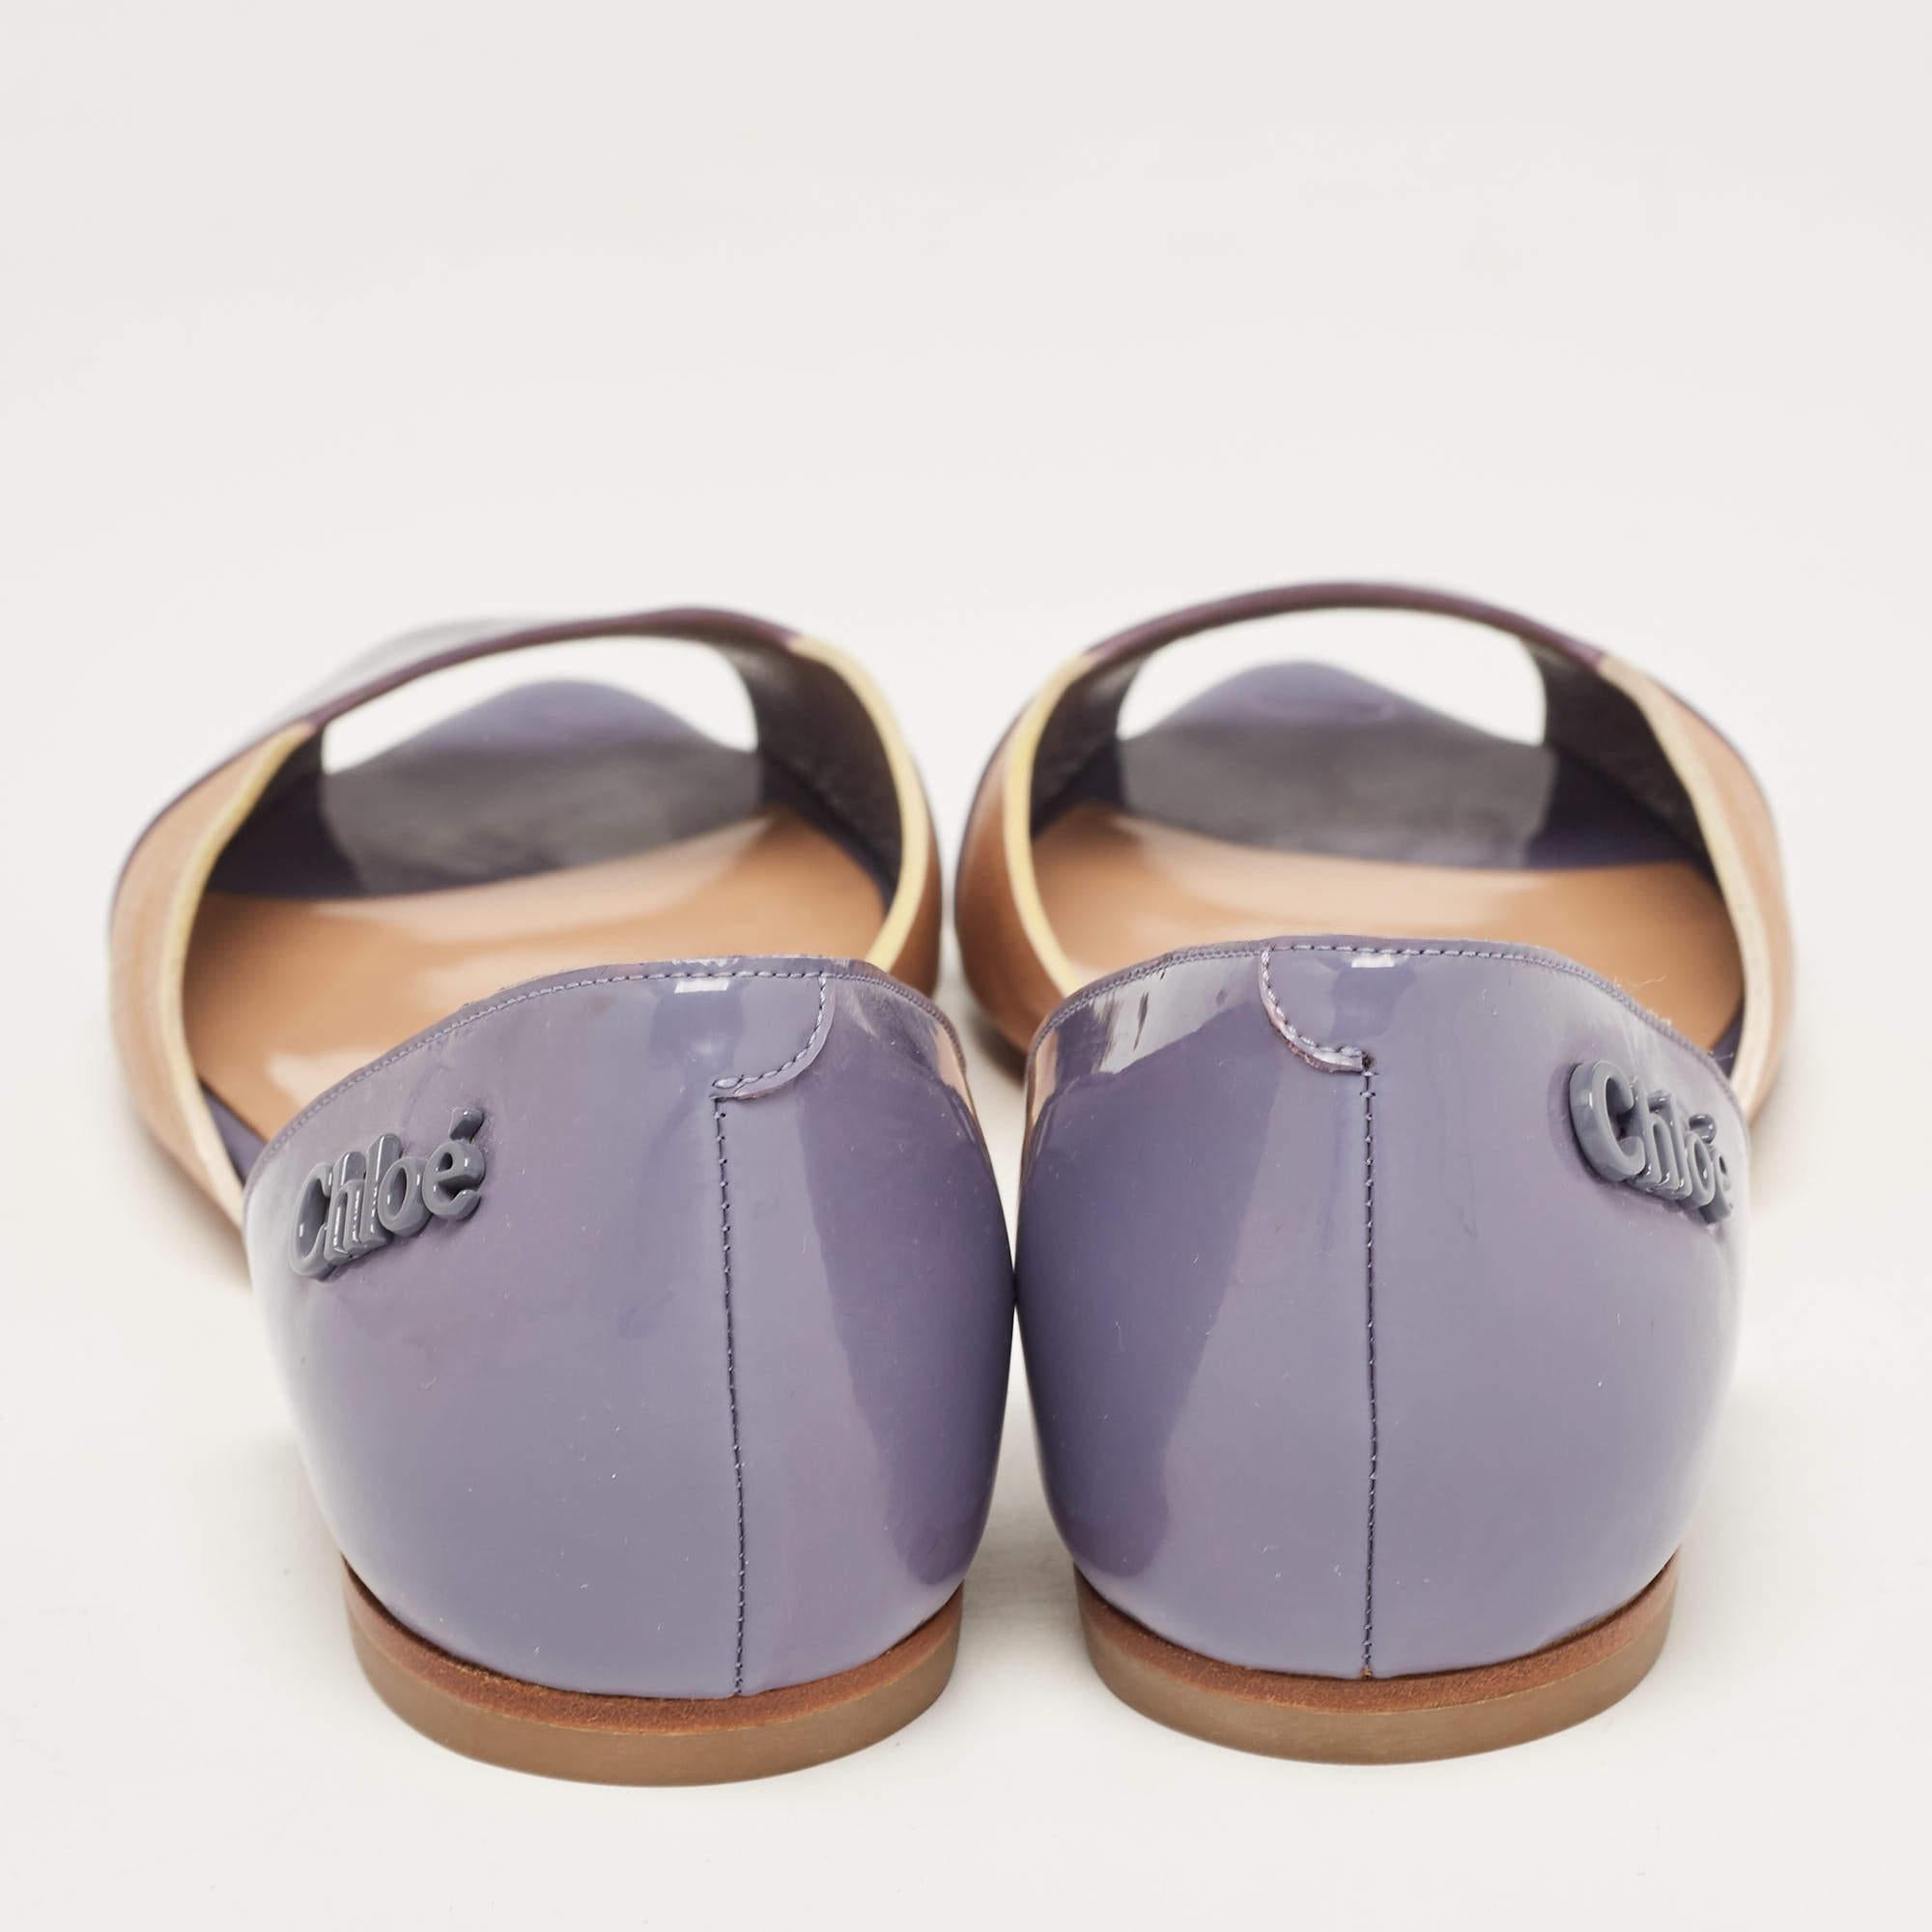 Chloé Blue/Brown Leather Open Toe D'orsay Flats Size 38 2